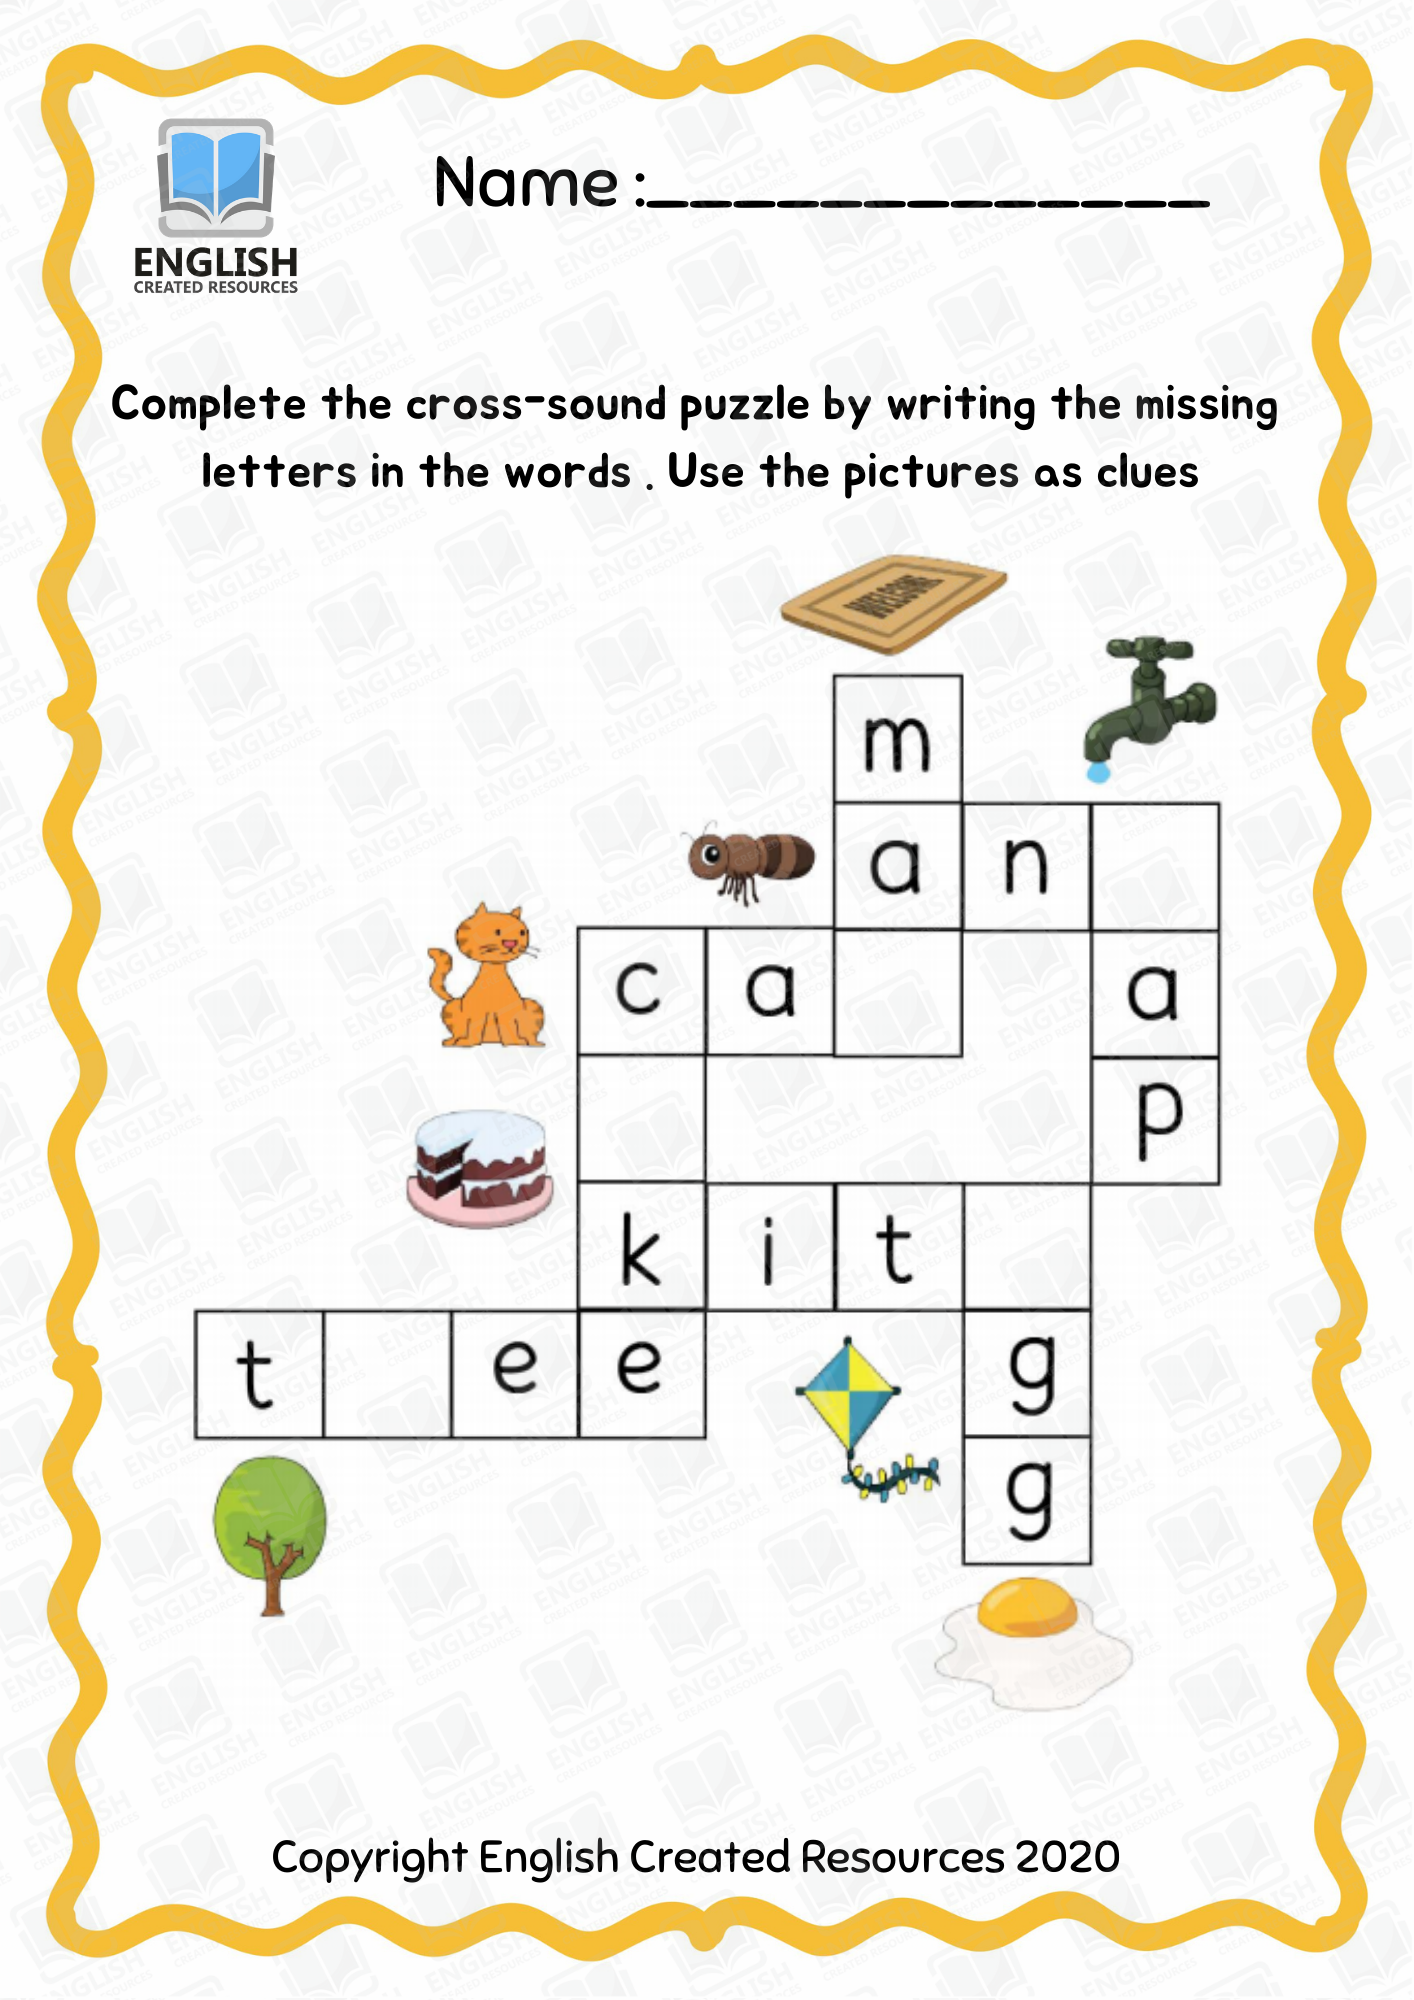 crossword-puzzles-for-esl-students-printable-crossword-puzzles-printable